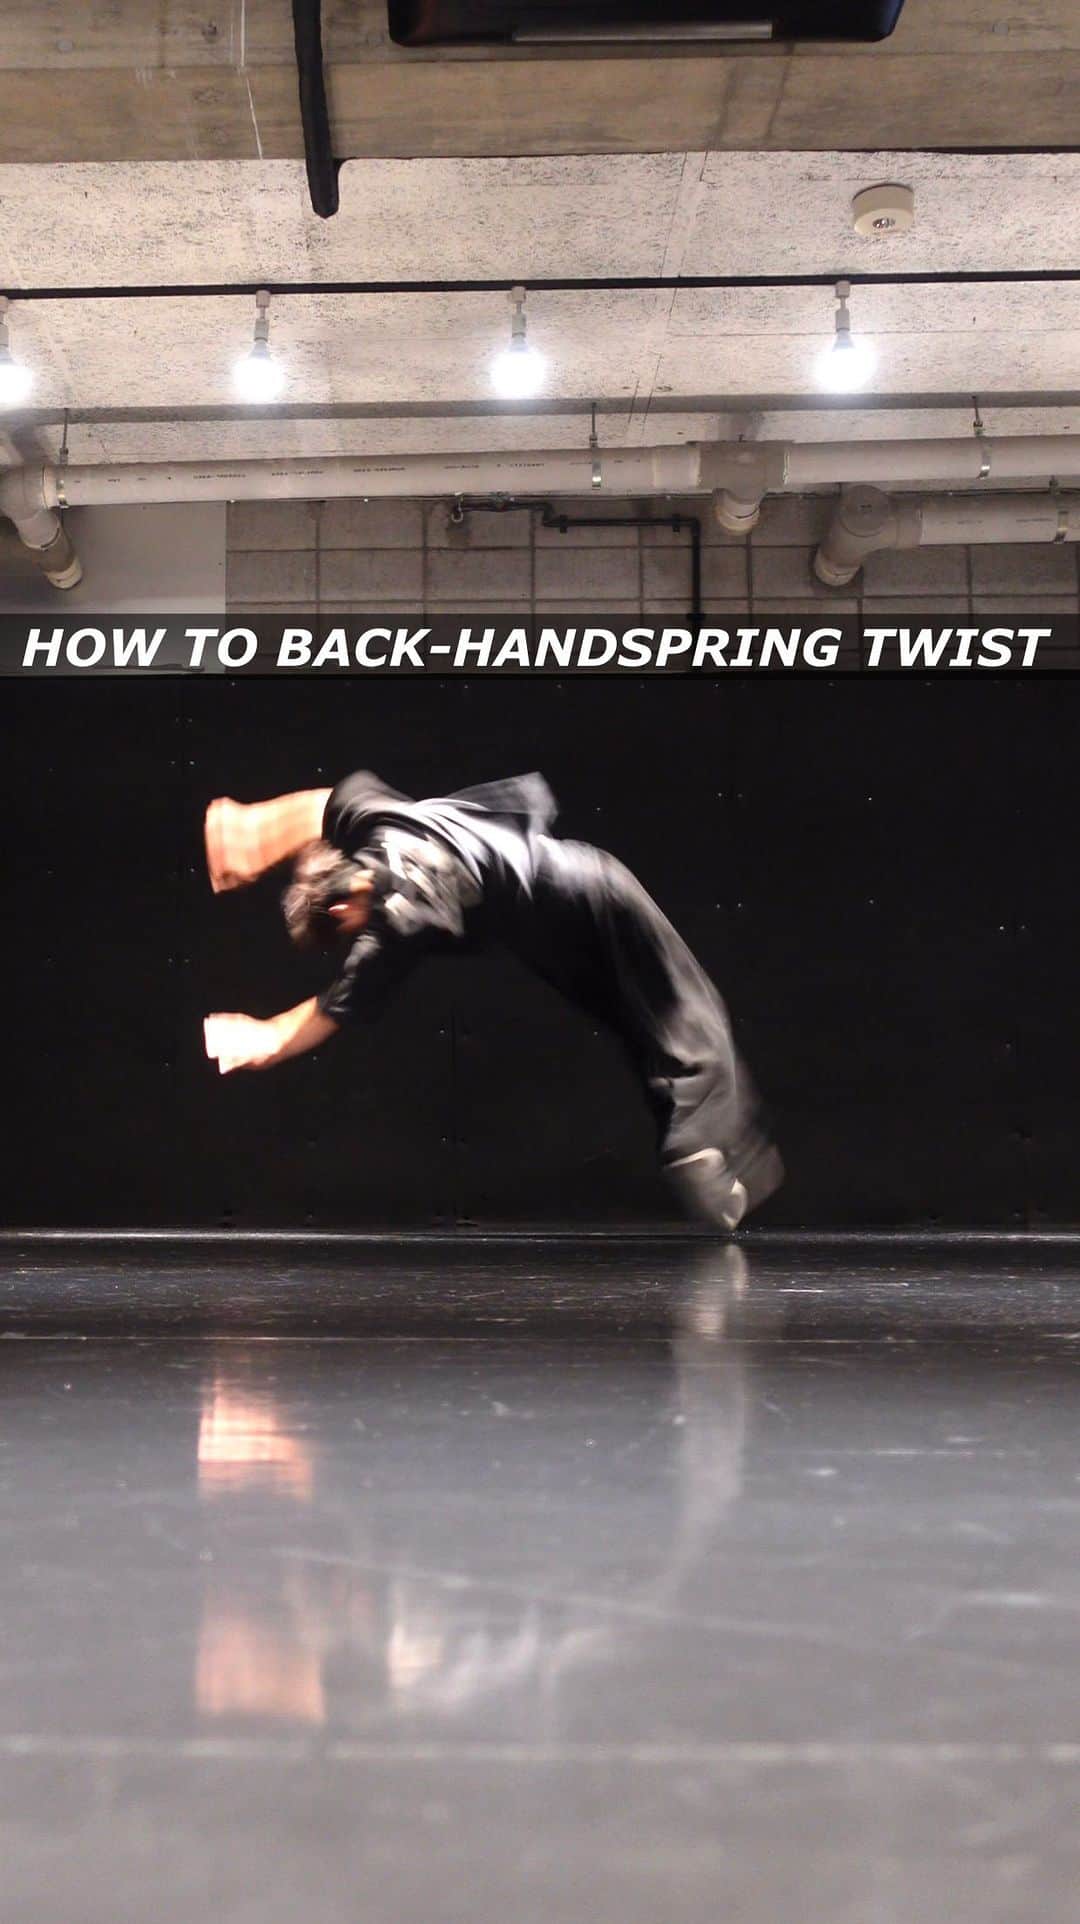 asukaのインスタグラム：「The easy way to learn 【Back-Handspring twist 】   Everybody can do this skill 🔥   What do you think?🤔   Lectured by @bboy_asuka   If you can master it, let me know in the comments😉   ↓↓↓↓    #dance #breaking #breakdance #bboy #powermove #powermoves #acrobatics #tricking #parkour #gymnastics #movement #capoeira #ブレイキン #超人」